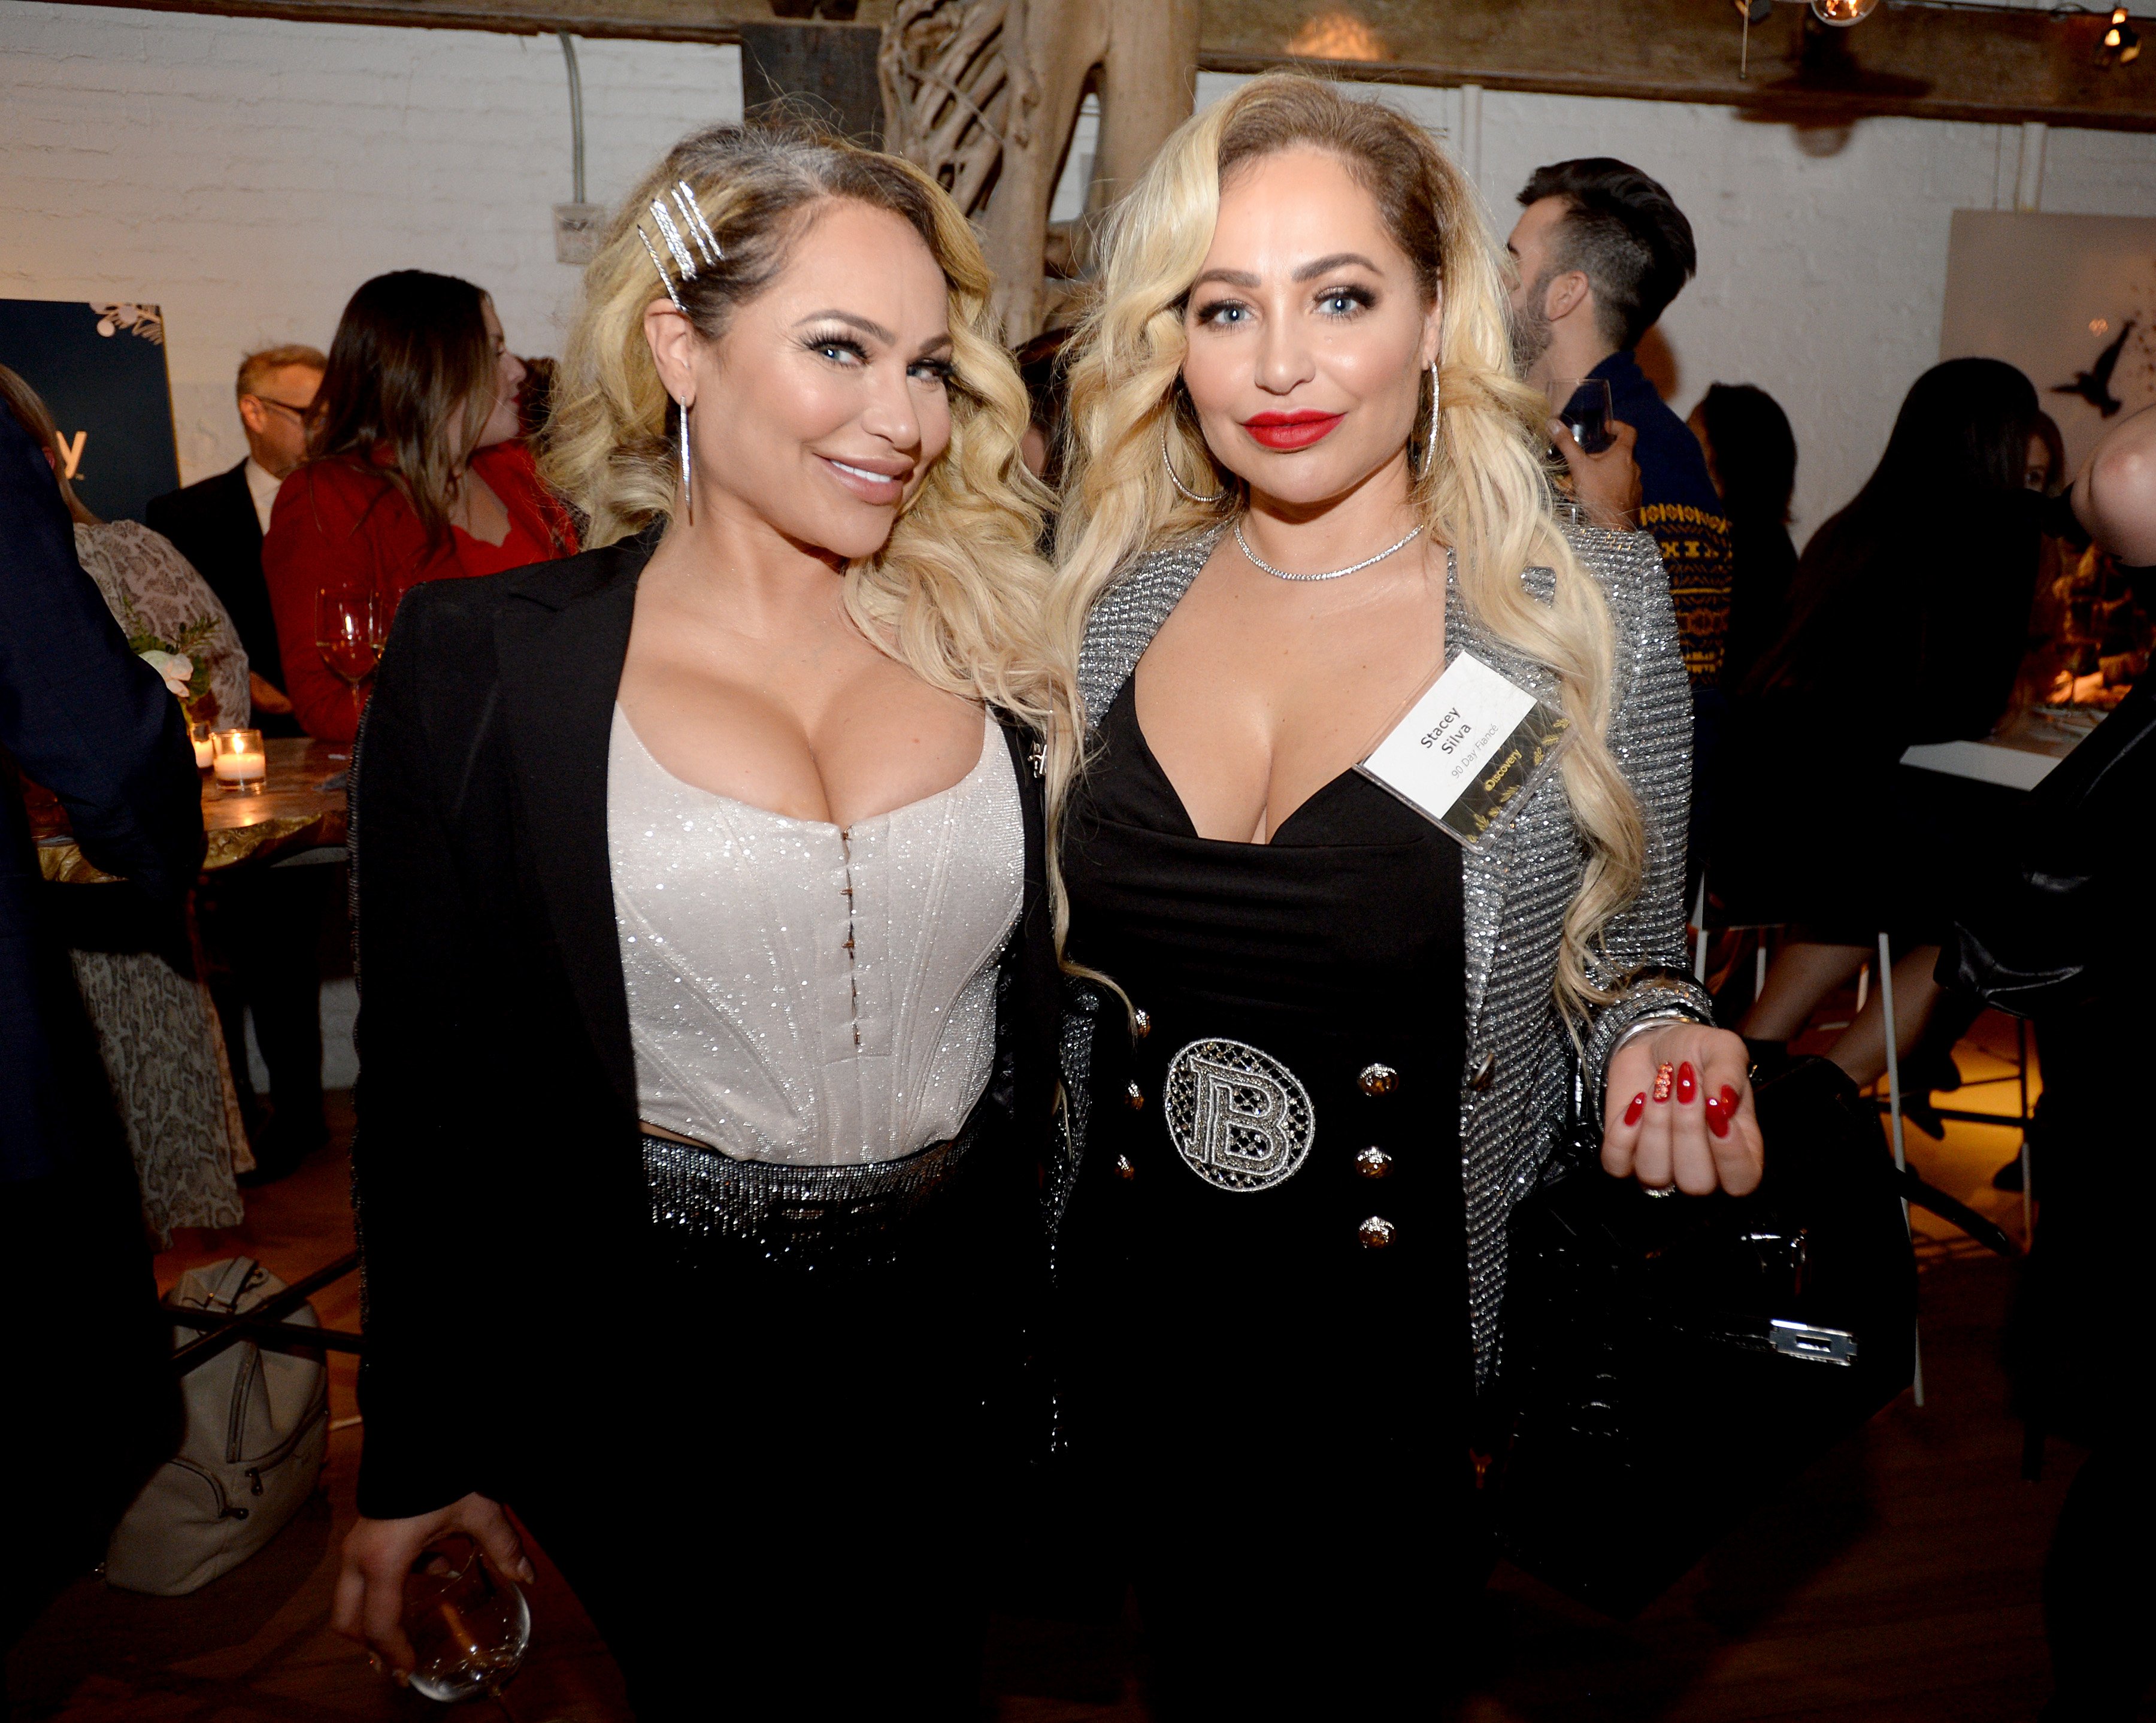 Darcey and Stacey Silva at the Discovery, Inc. Holiday Press Party in 2019